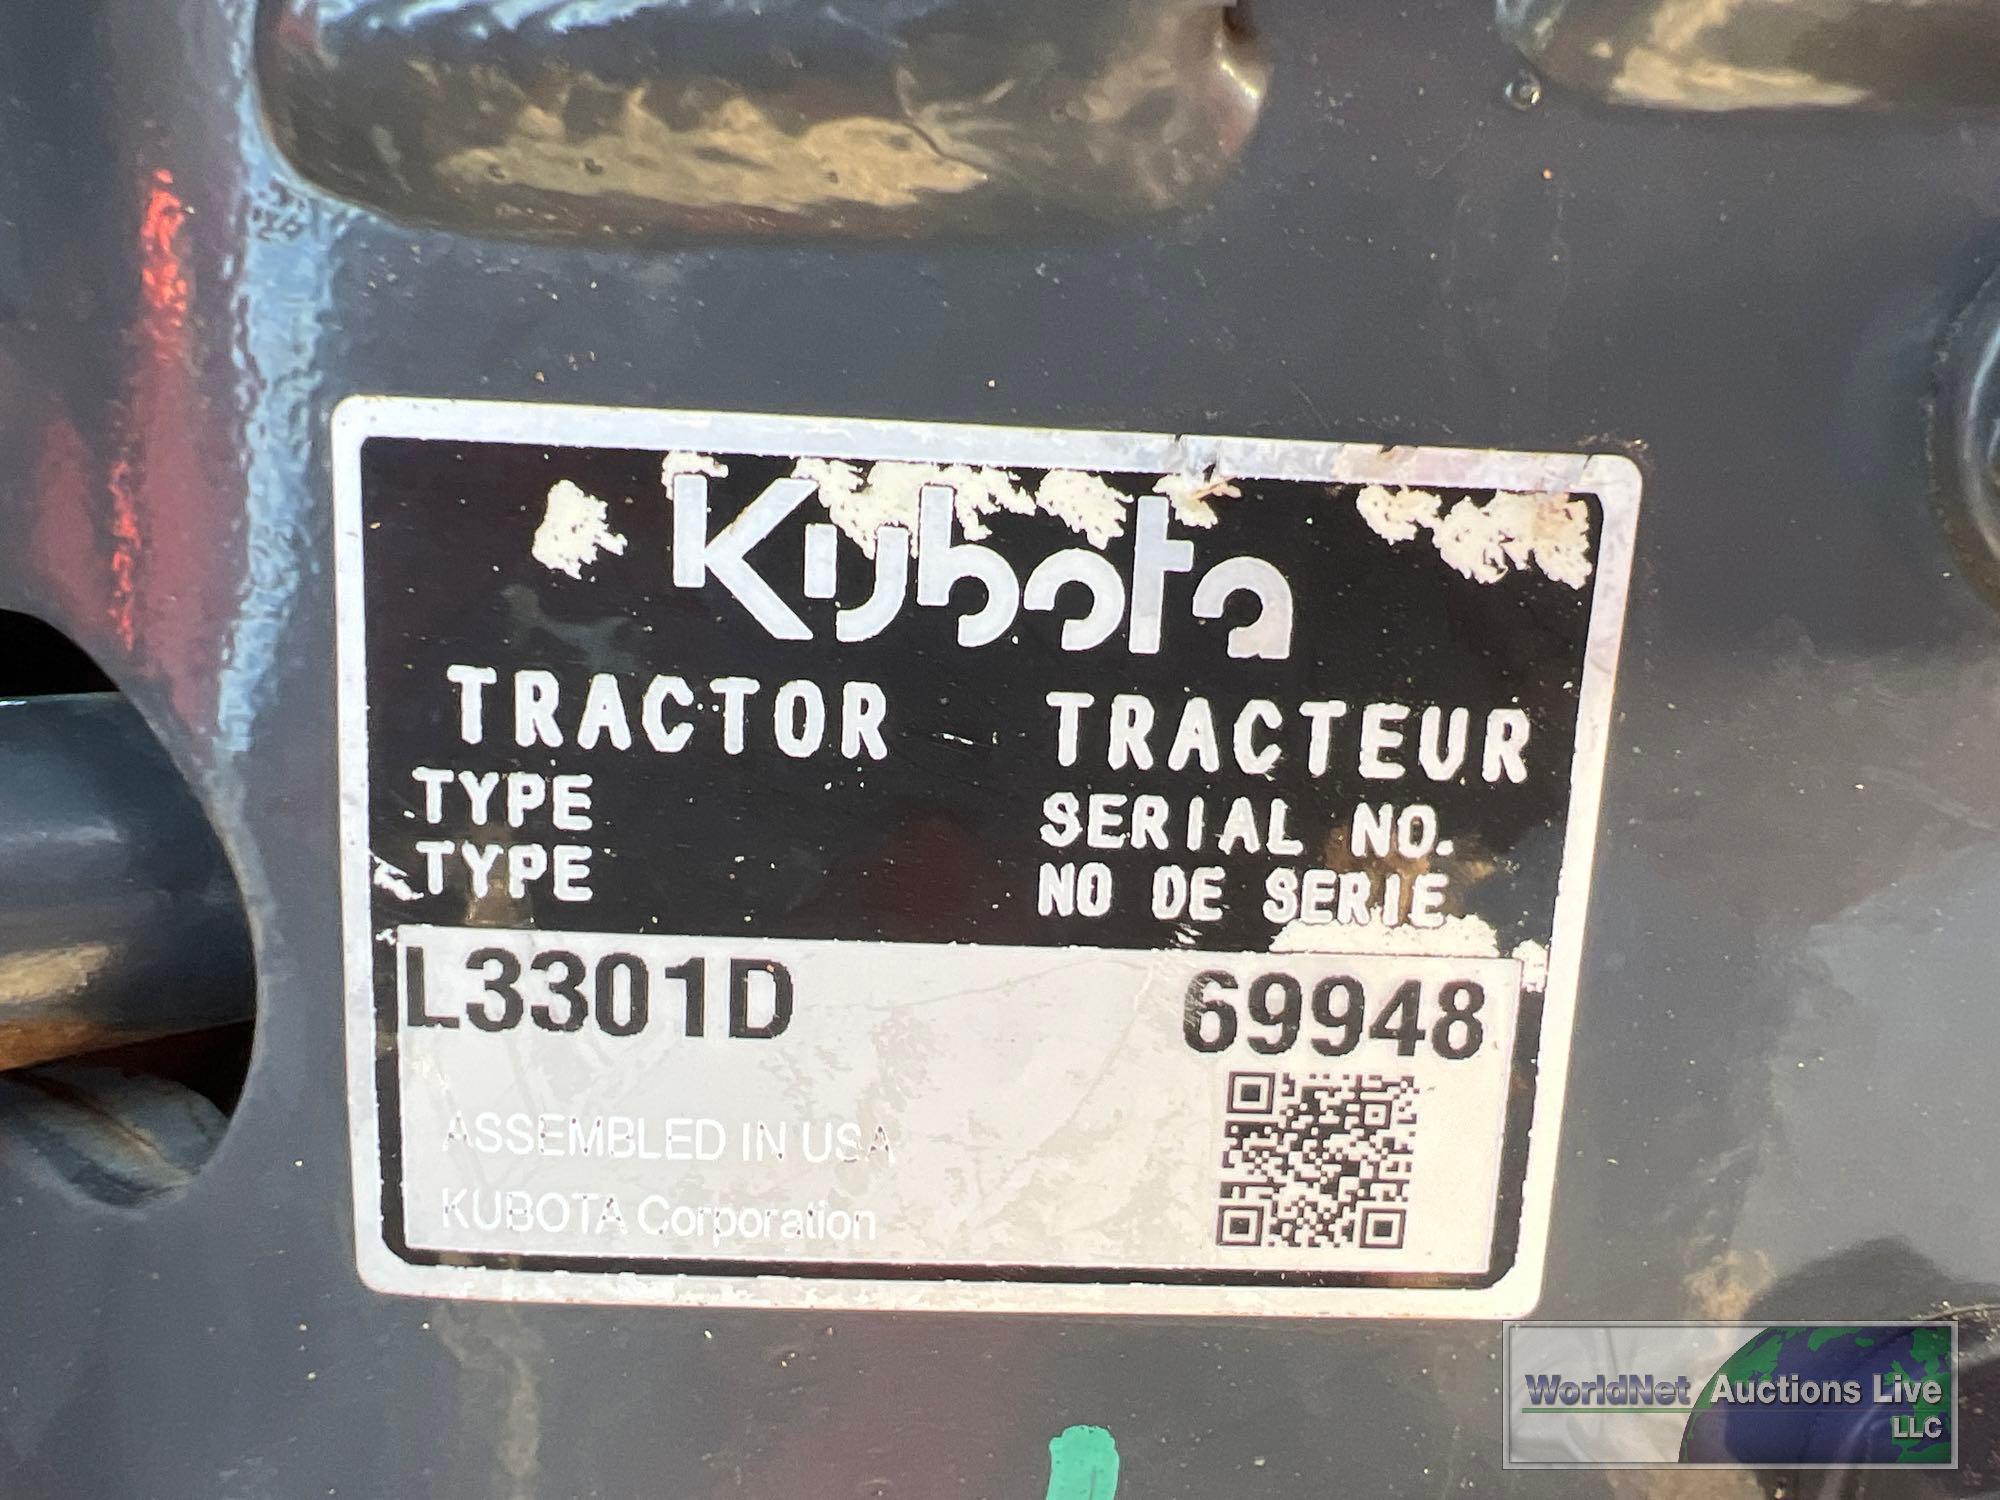 2017 KUBOTA L3301D COMPACT UTILITY TRACTOR SN-69948